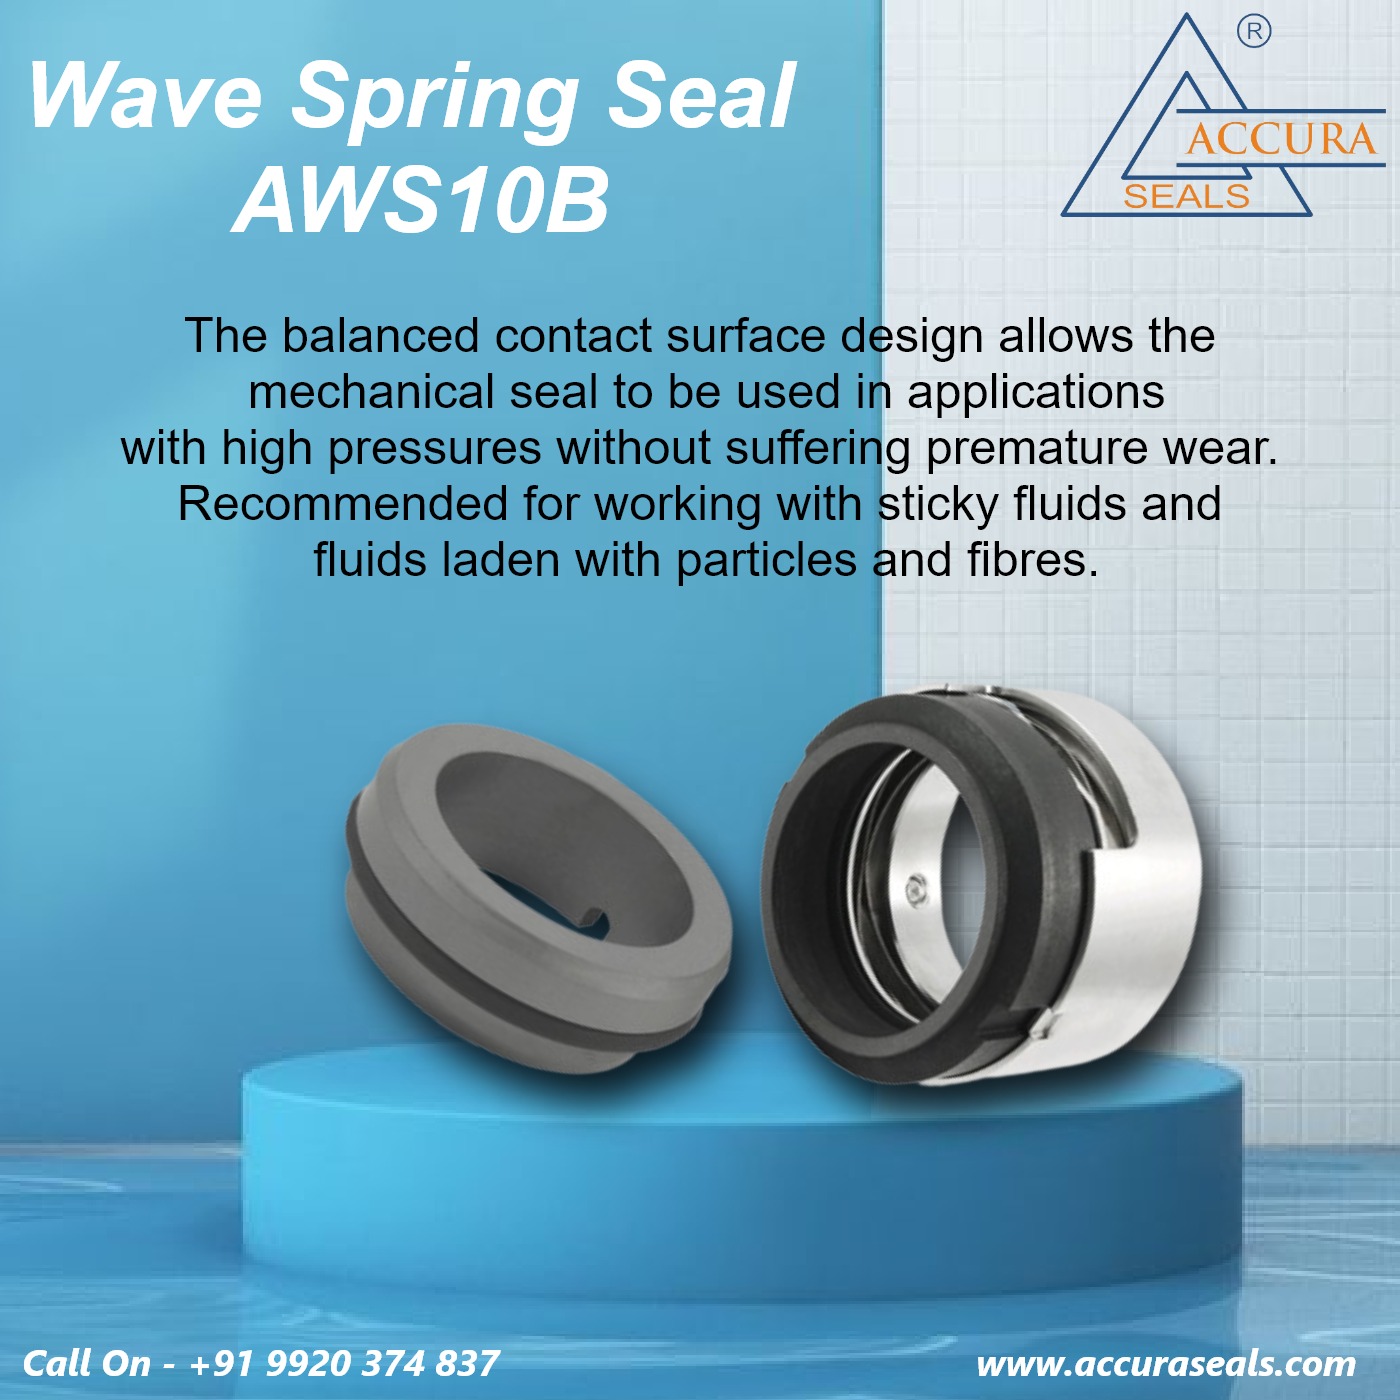 Wave Spring Seal AWS10B | High-Pressure Applications Specialist